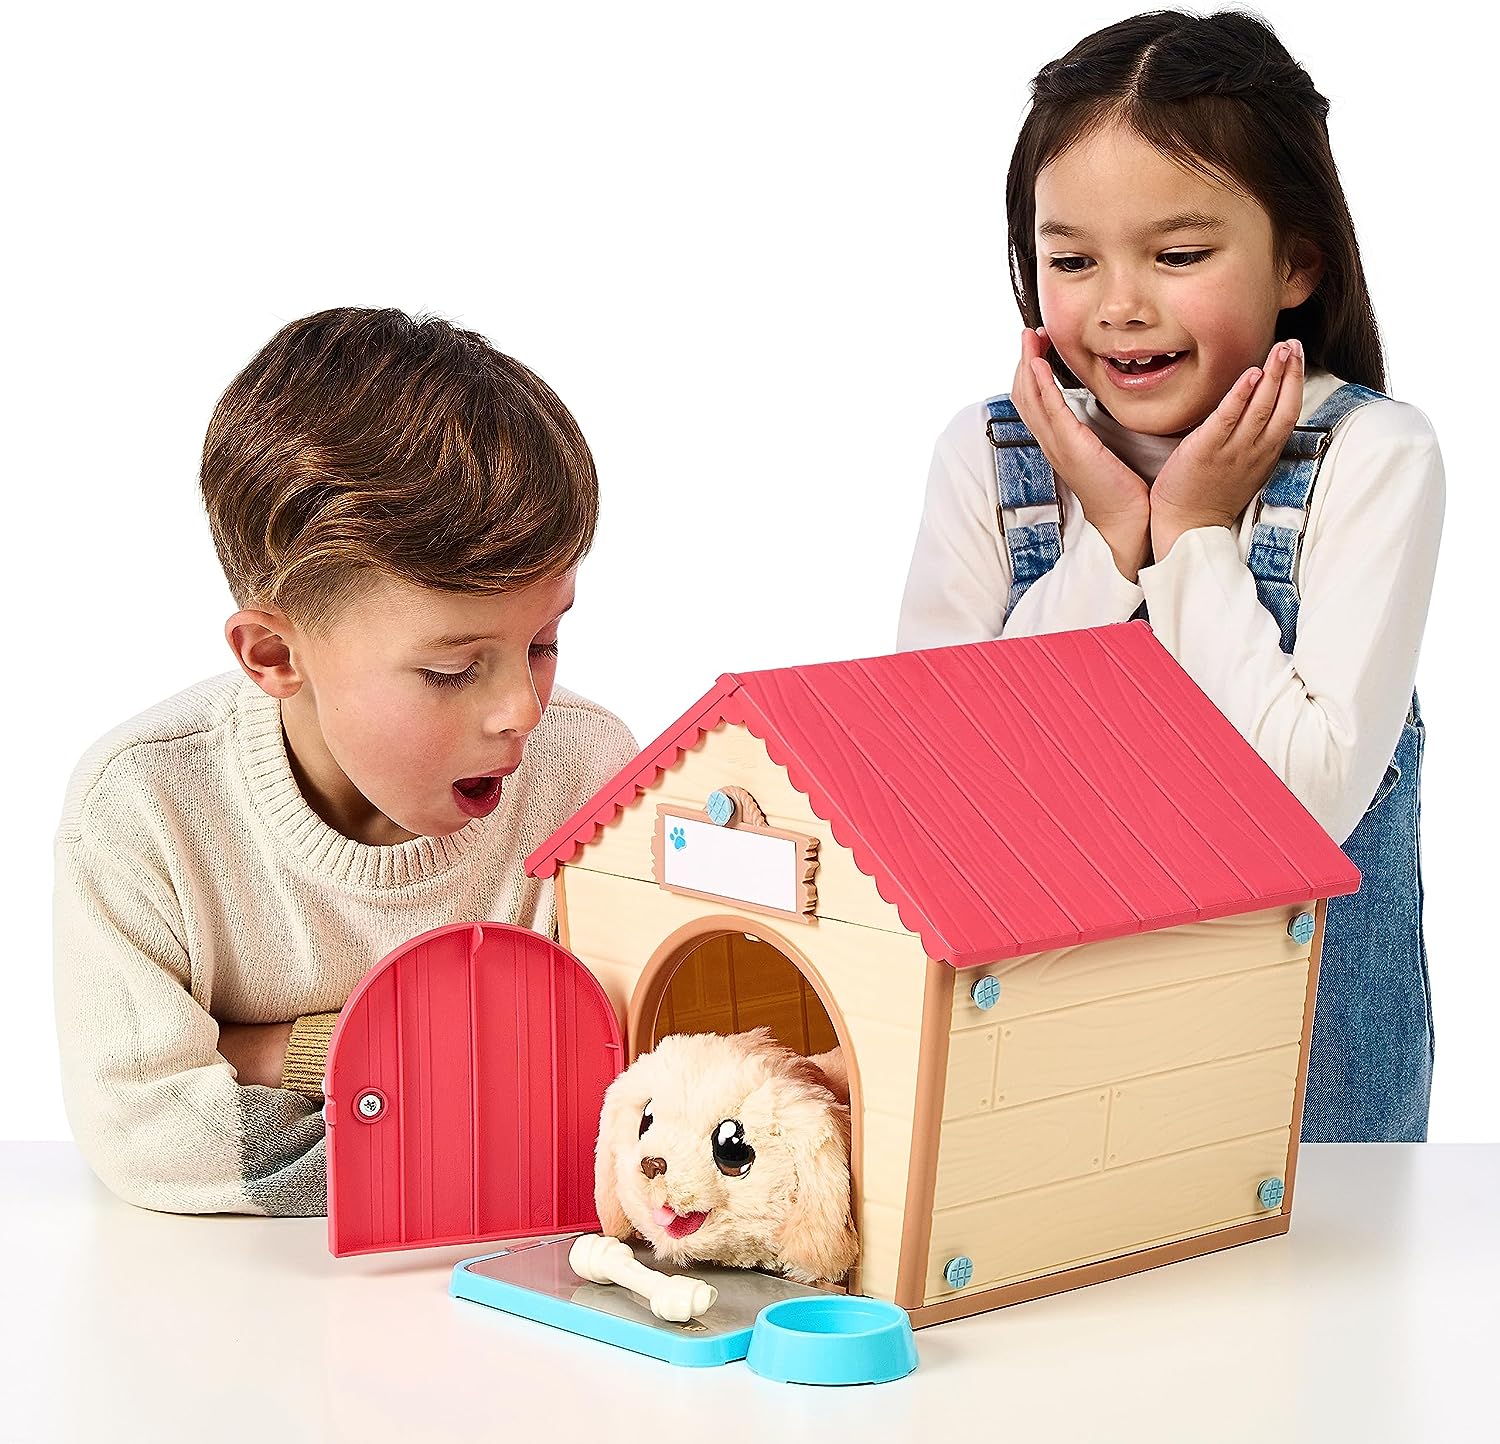 Little Live Pets My Puppy's Home Plush Toy Puppy & Kennel